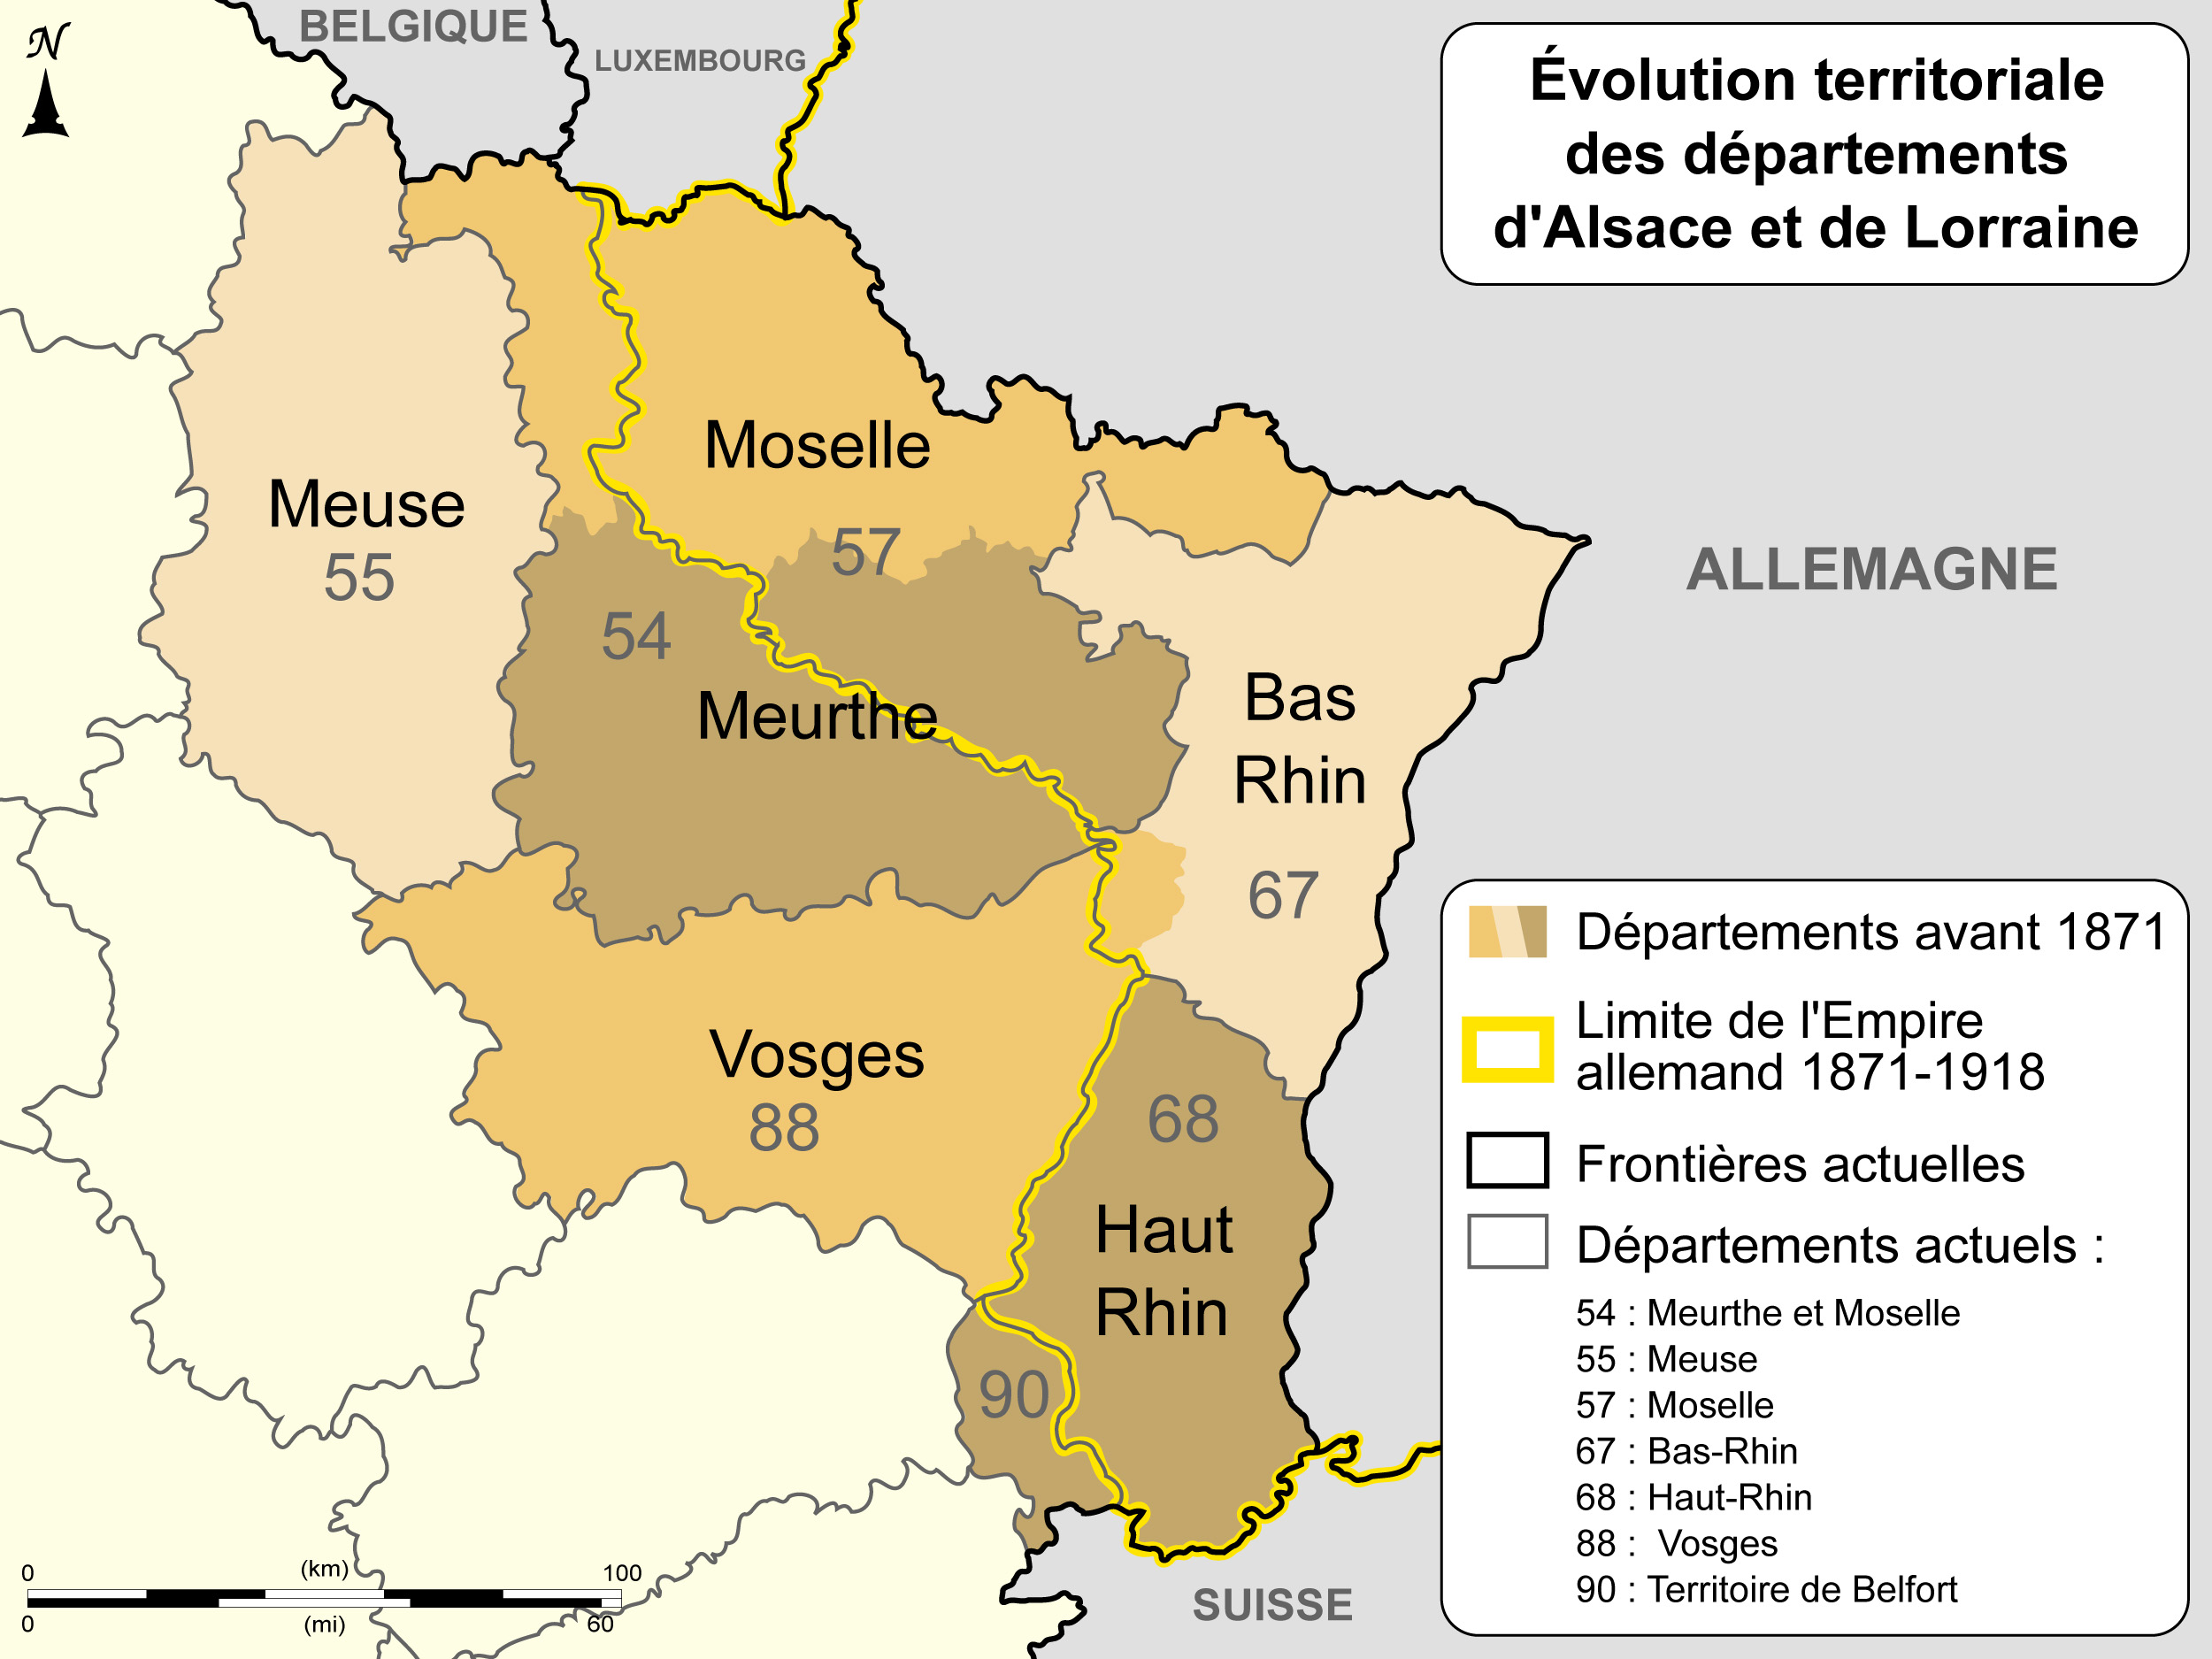 Evolution of departmental boundaries since 1871 © Sémhur - licence [CC BY-SA 4.0] from Wikimedia Commons